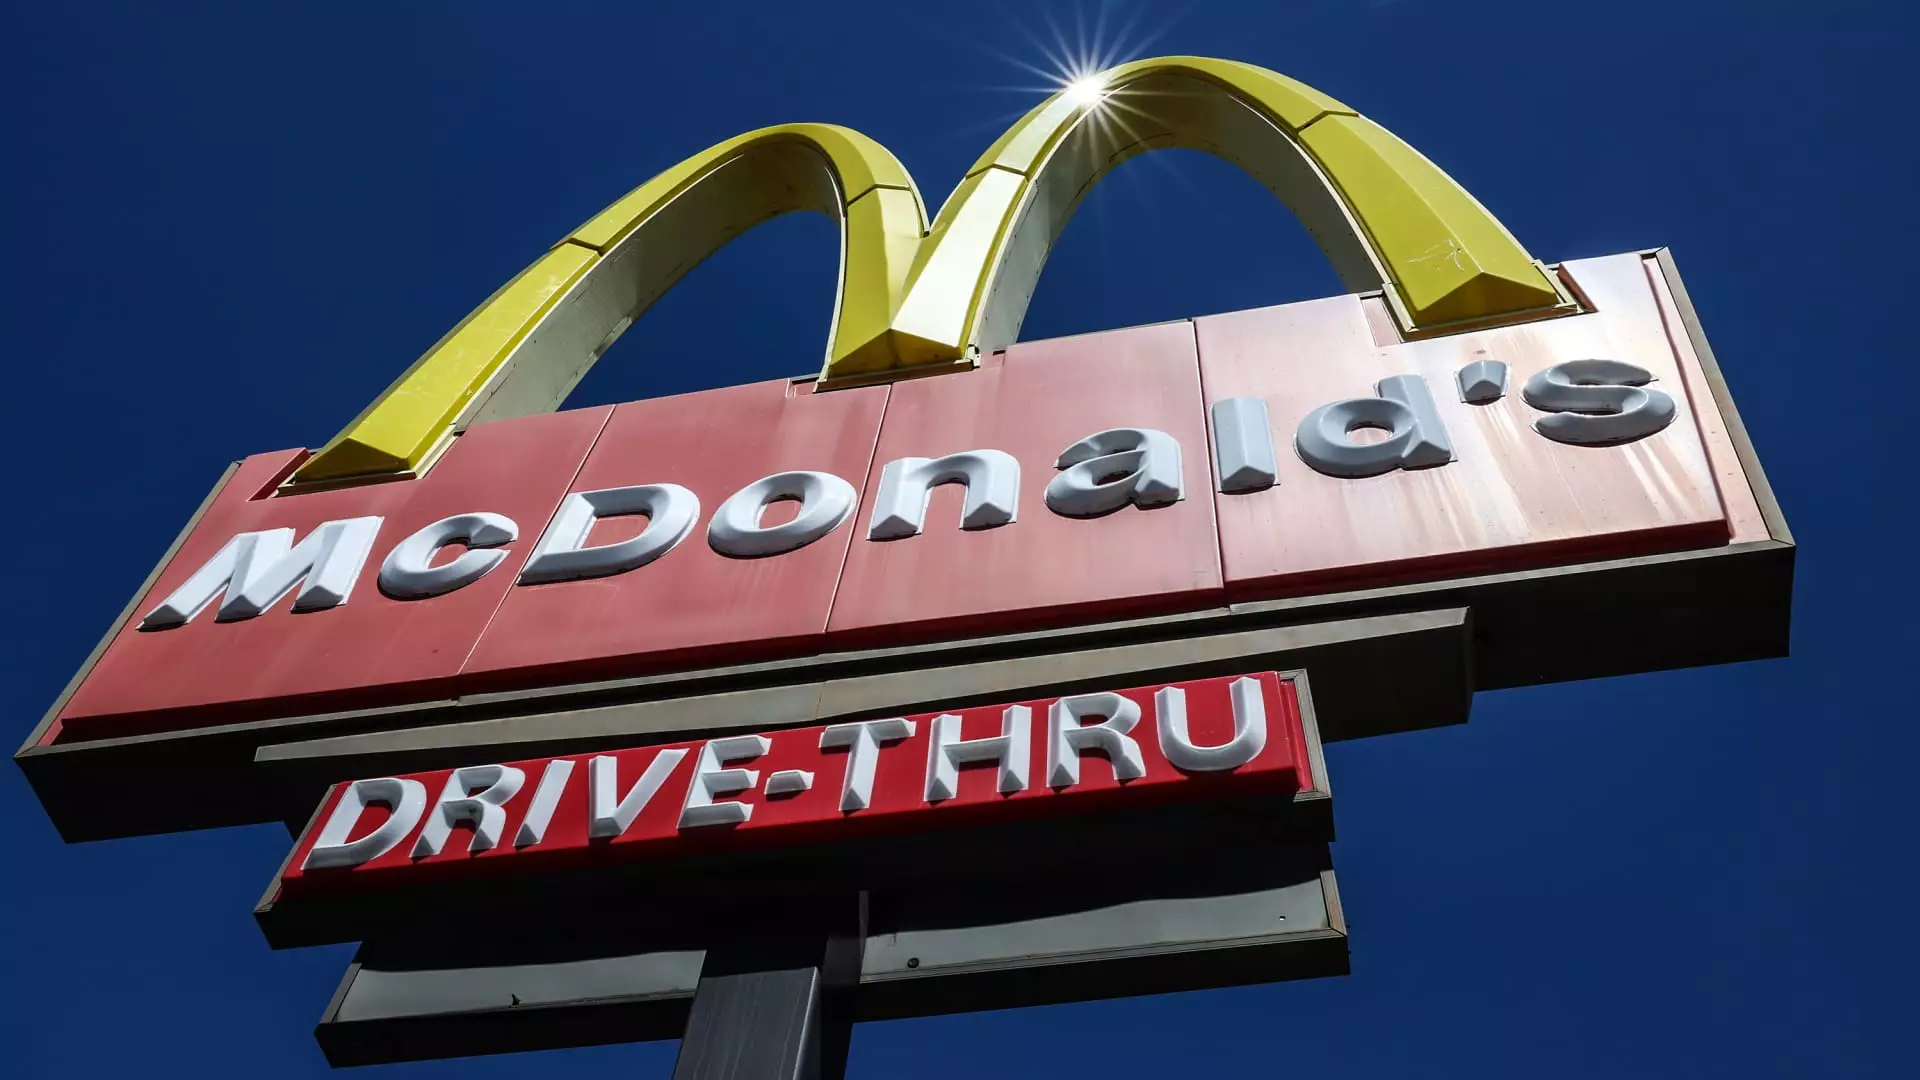 McDonald’s Looks to Introduce $5 Value Meal Amid Consumer Challenges